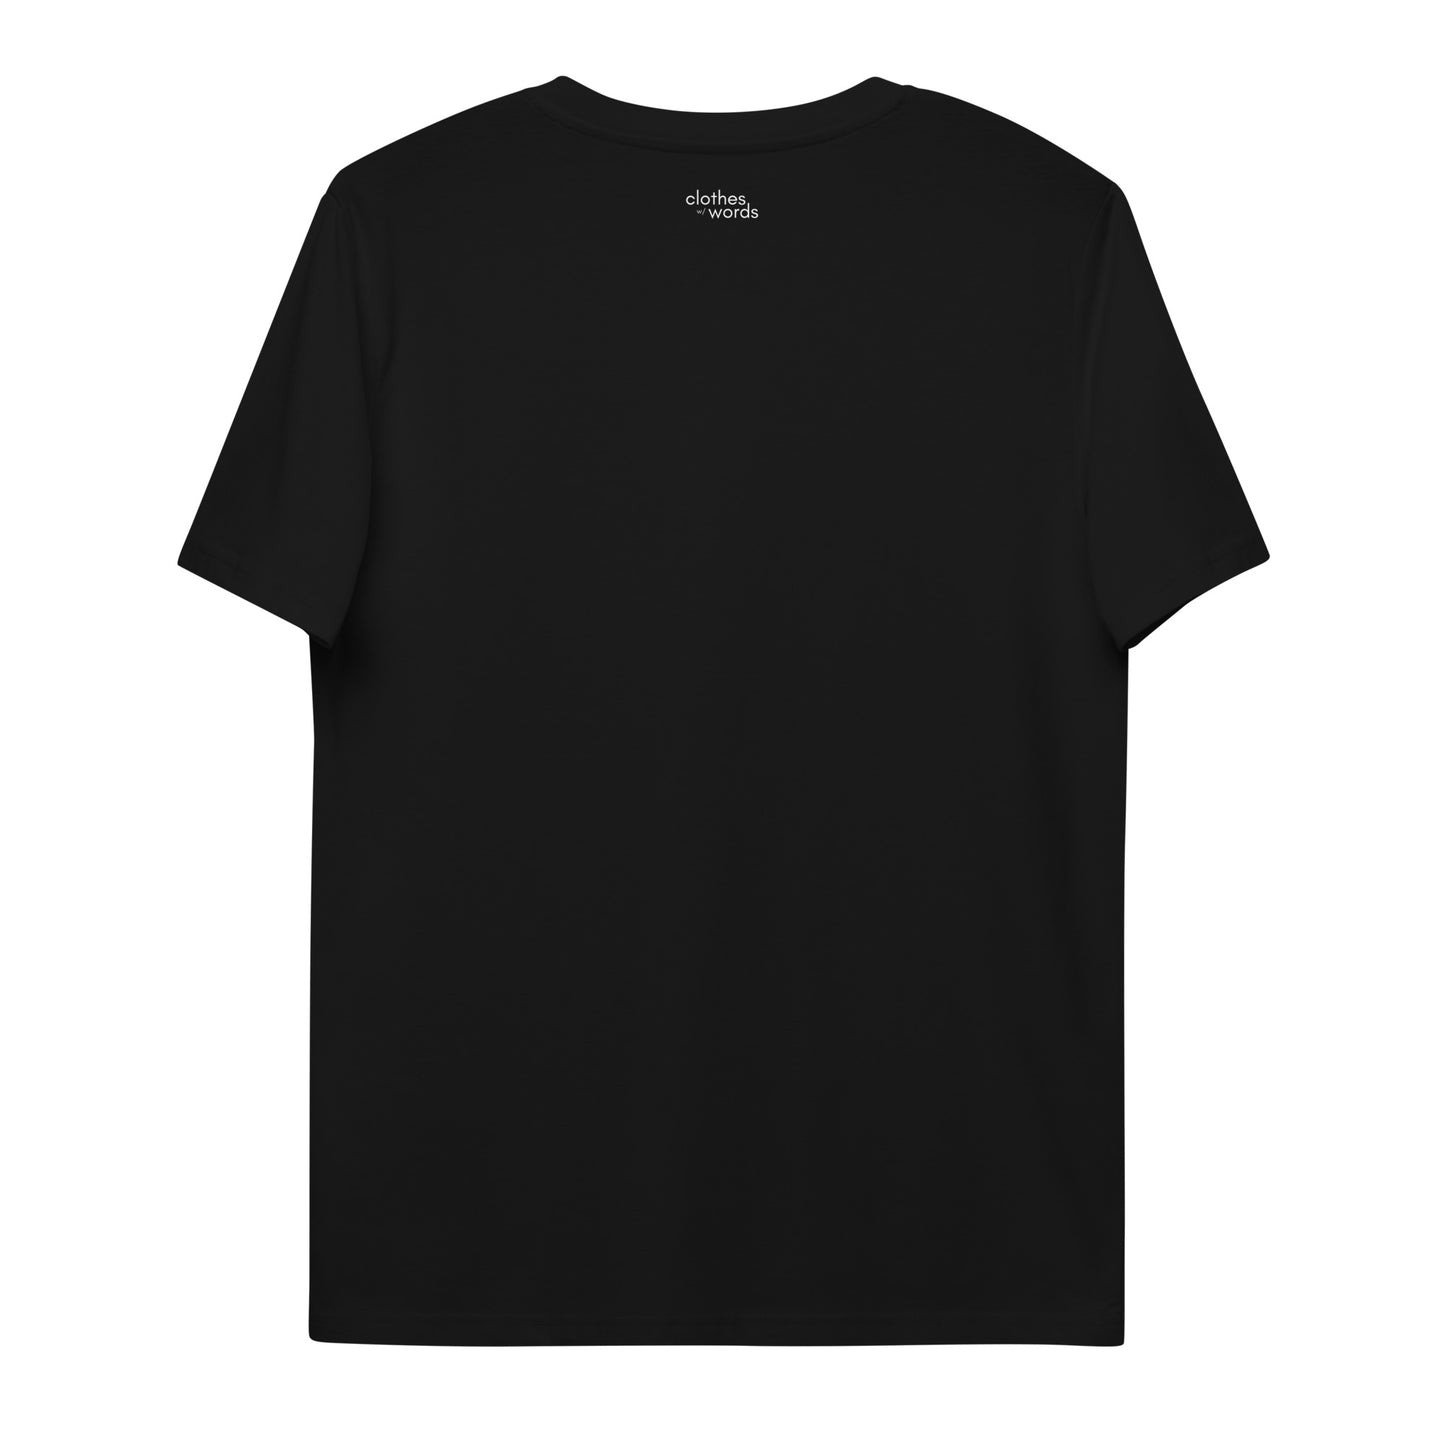 No Ego Club t-shirt black and unisex. Clothes With Words apparel.